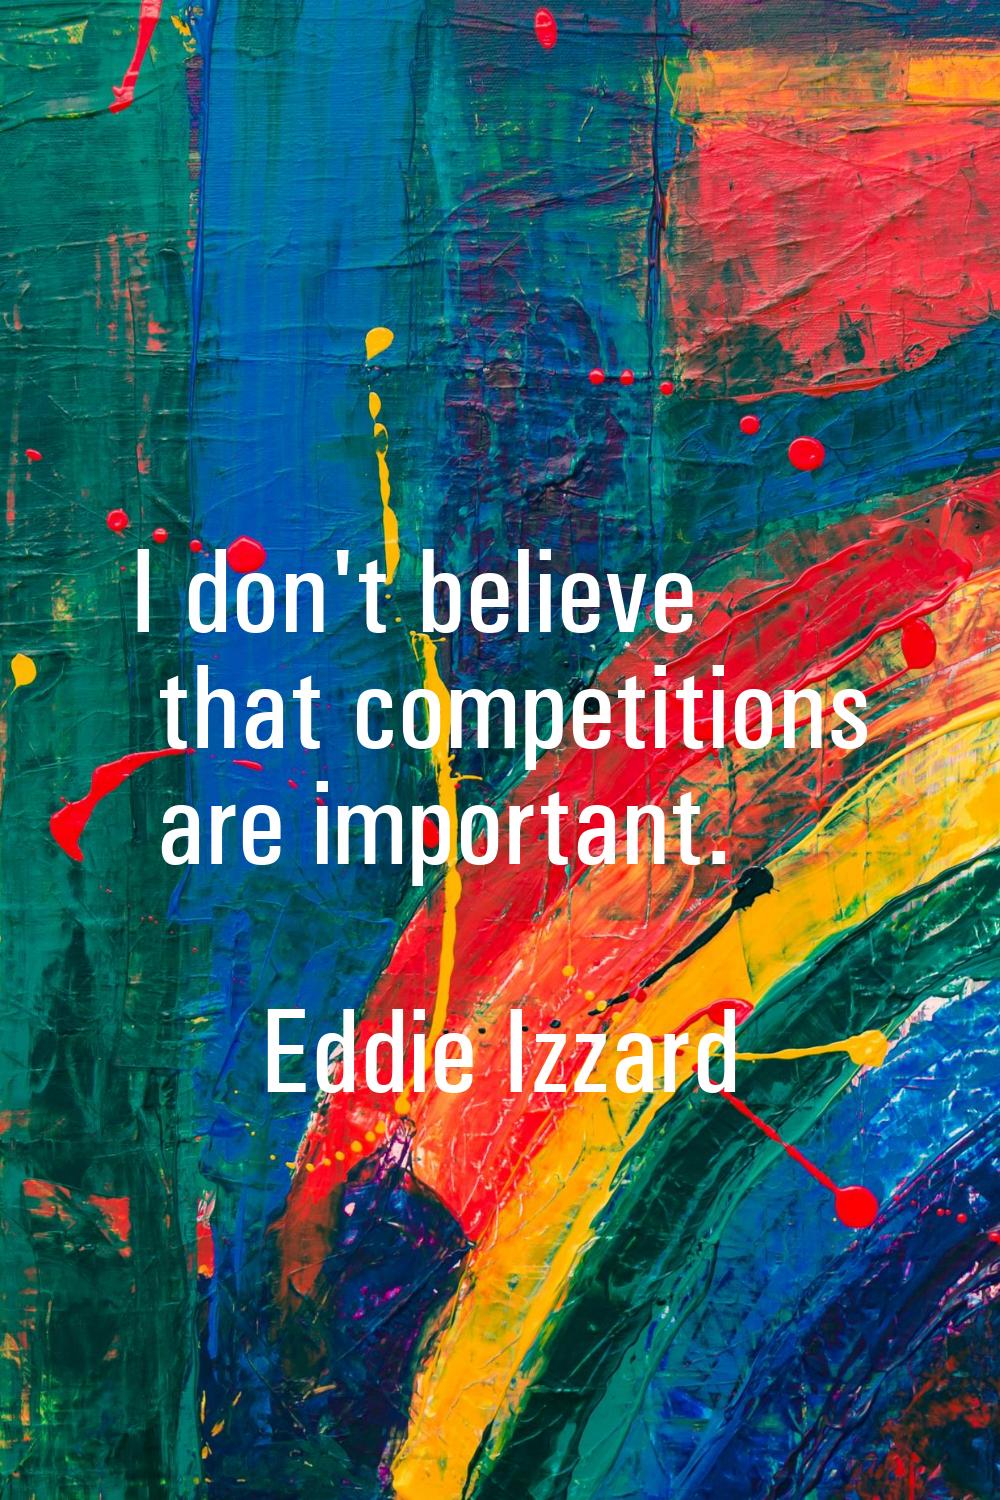 I don't believe that competitions are important.